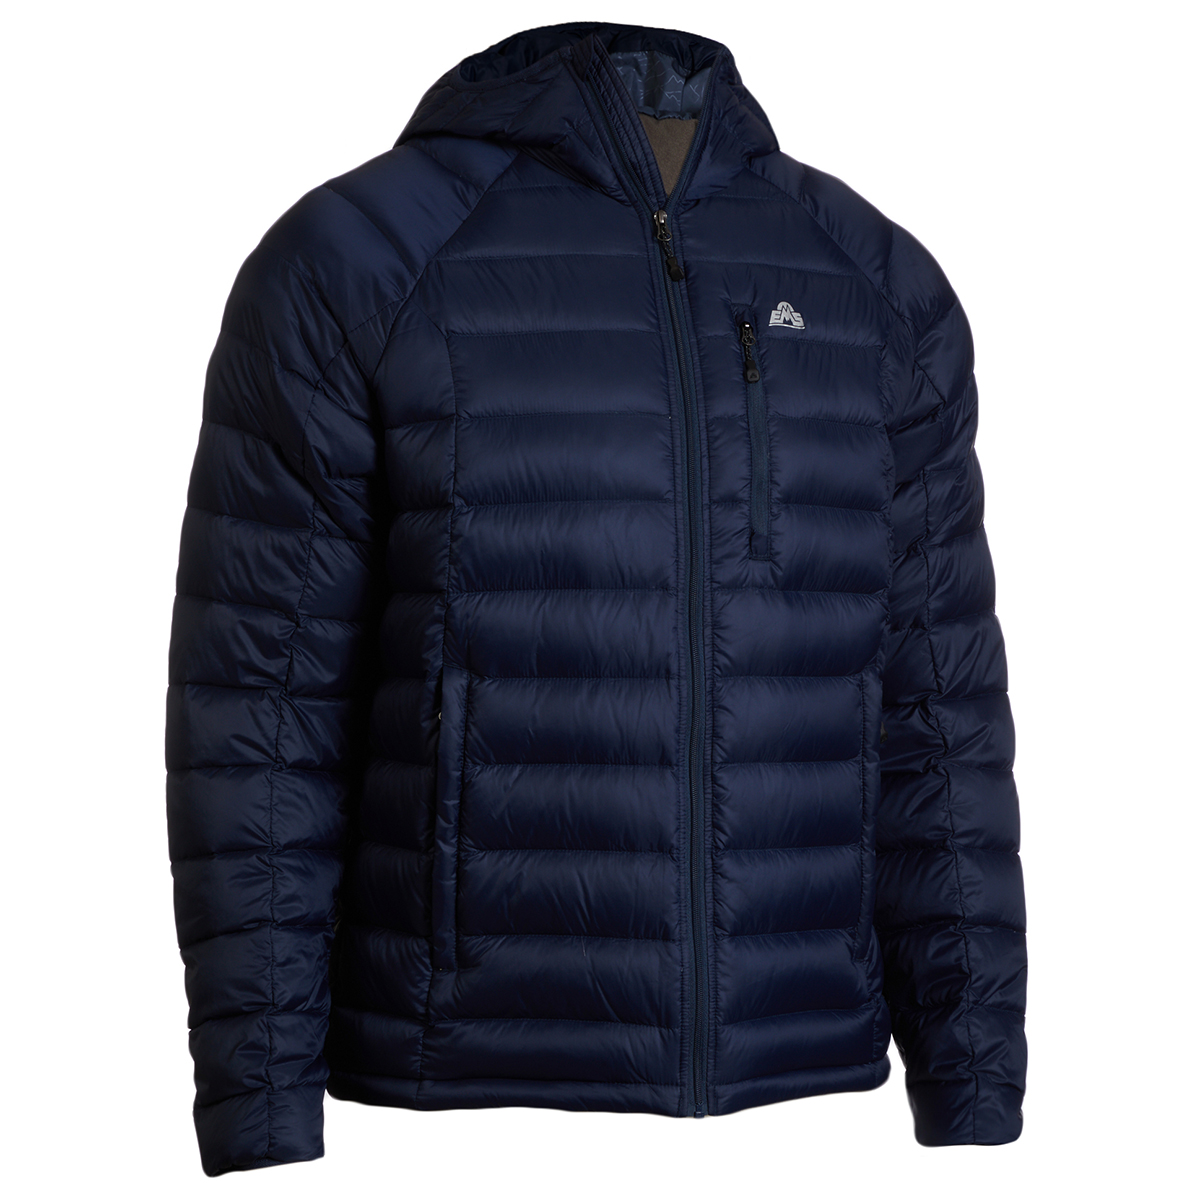 Ems Men's Featherpack Hooded Jacket - Blue, S